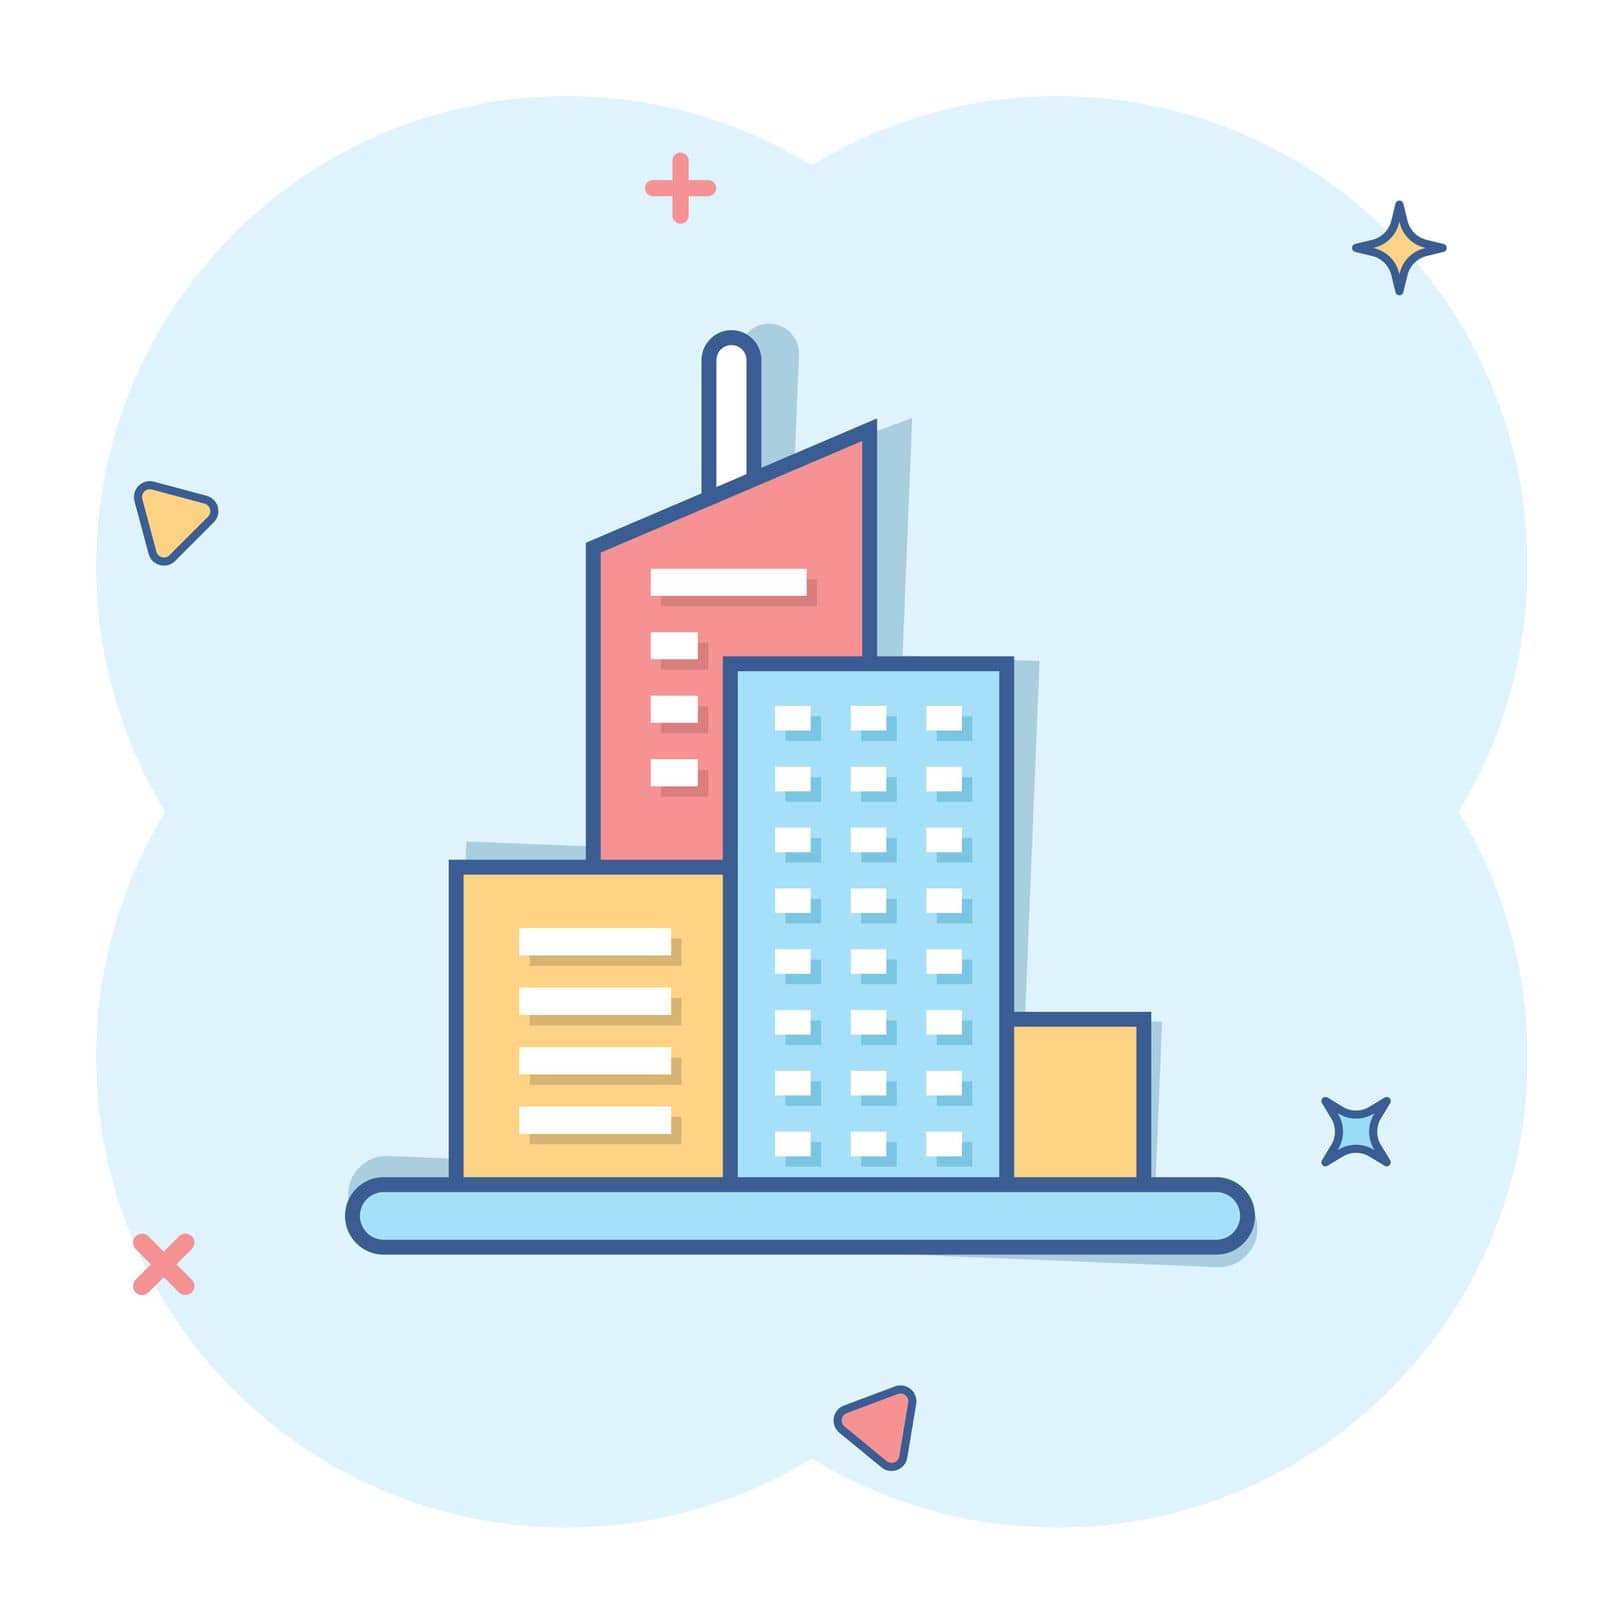 Building icon in comic style. Town skyscraper apartment cartoon vector illustration on white isolated background. City tower splash effect business concept.